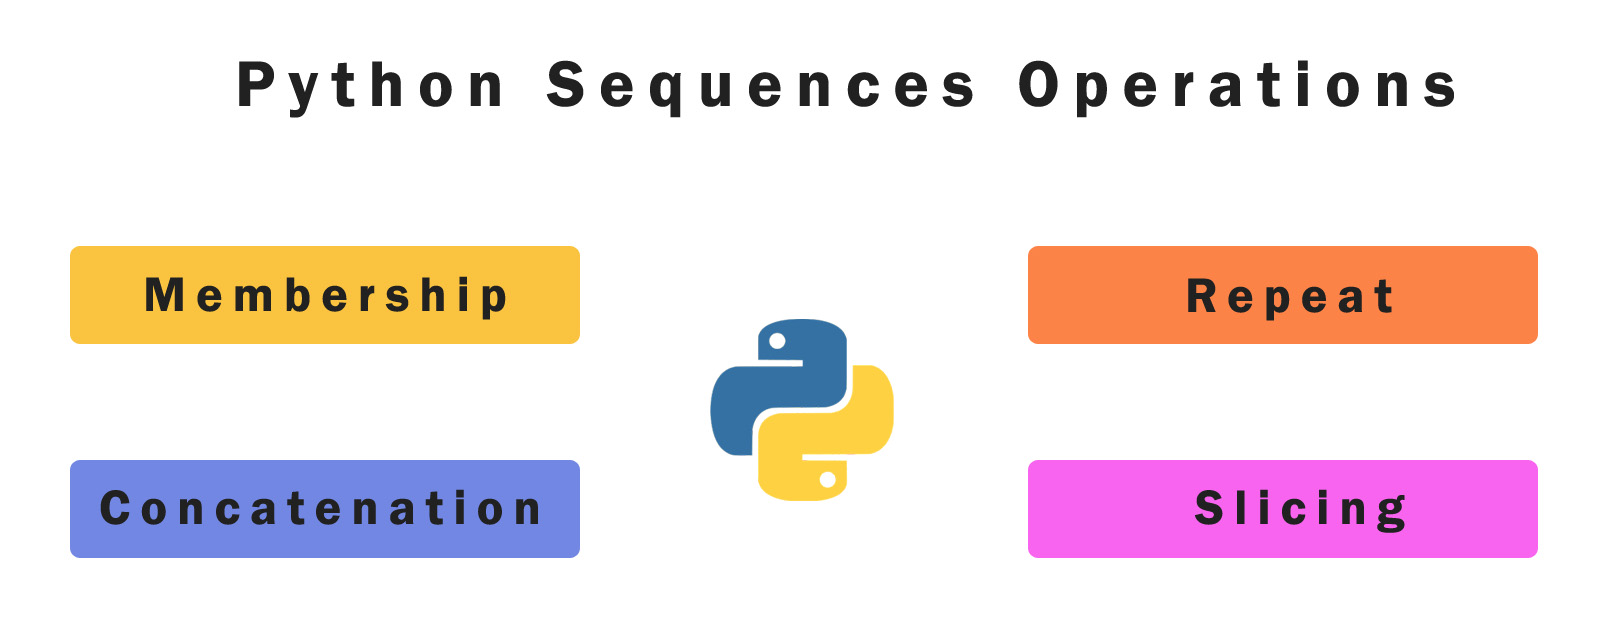 Python Sequences Operations